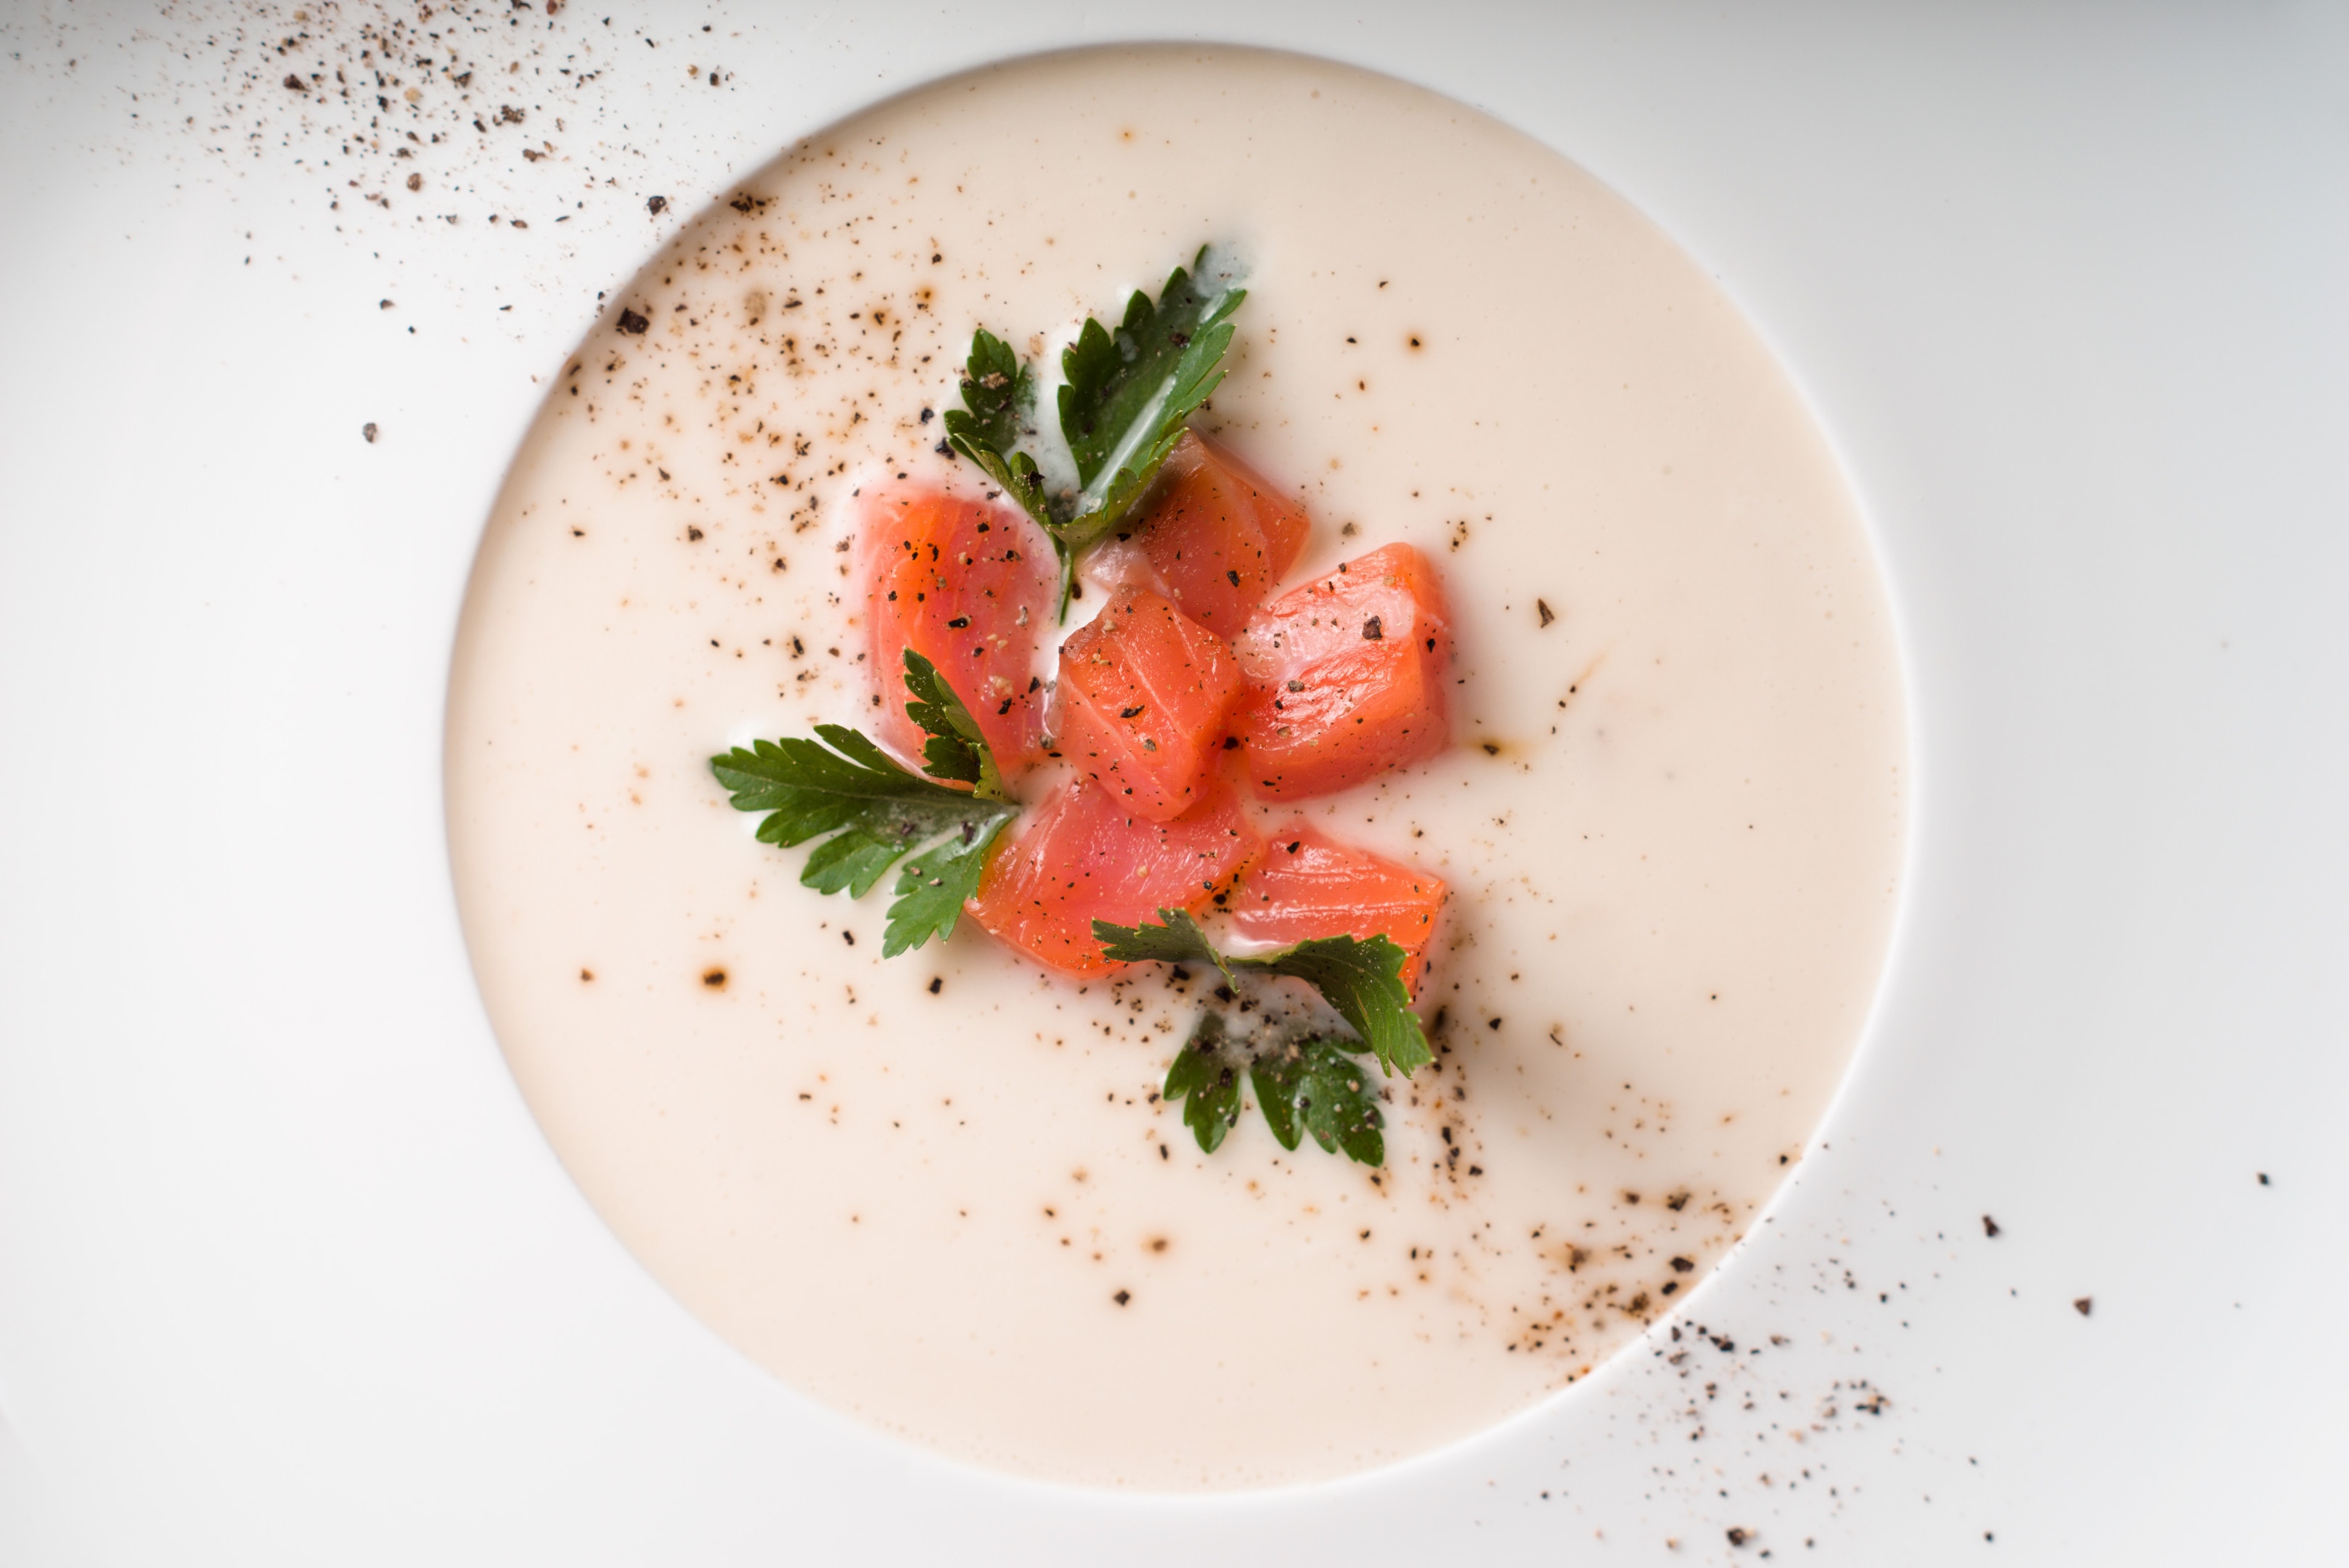 Soup puree from salmon in a porcelain dish